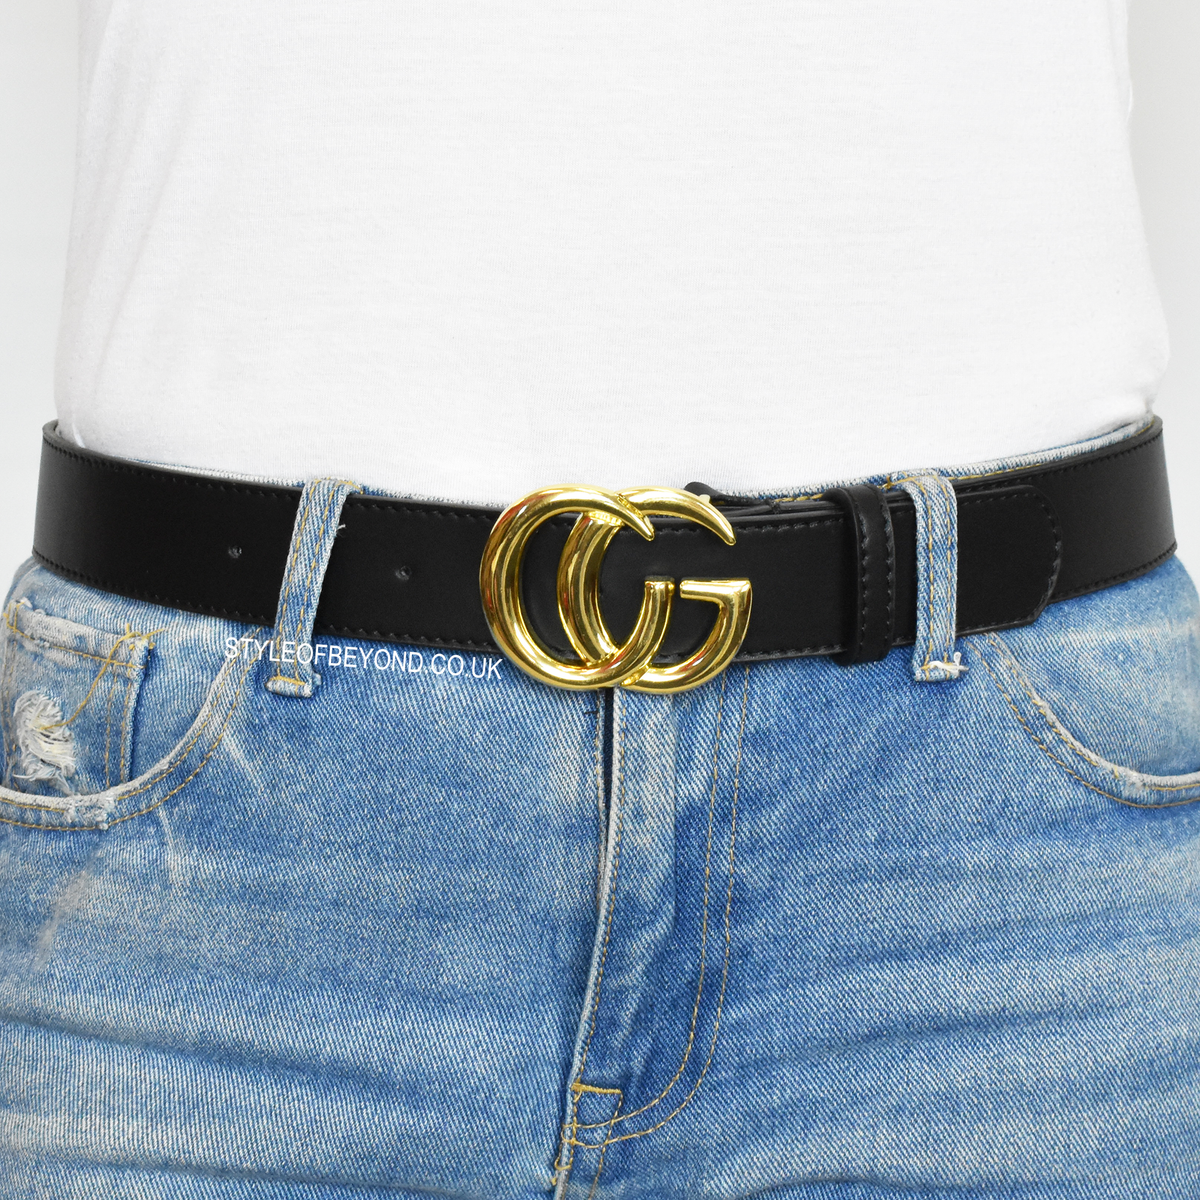 gucci inspired belts